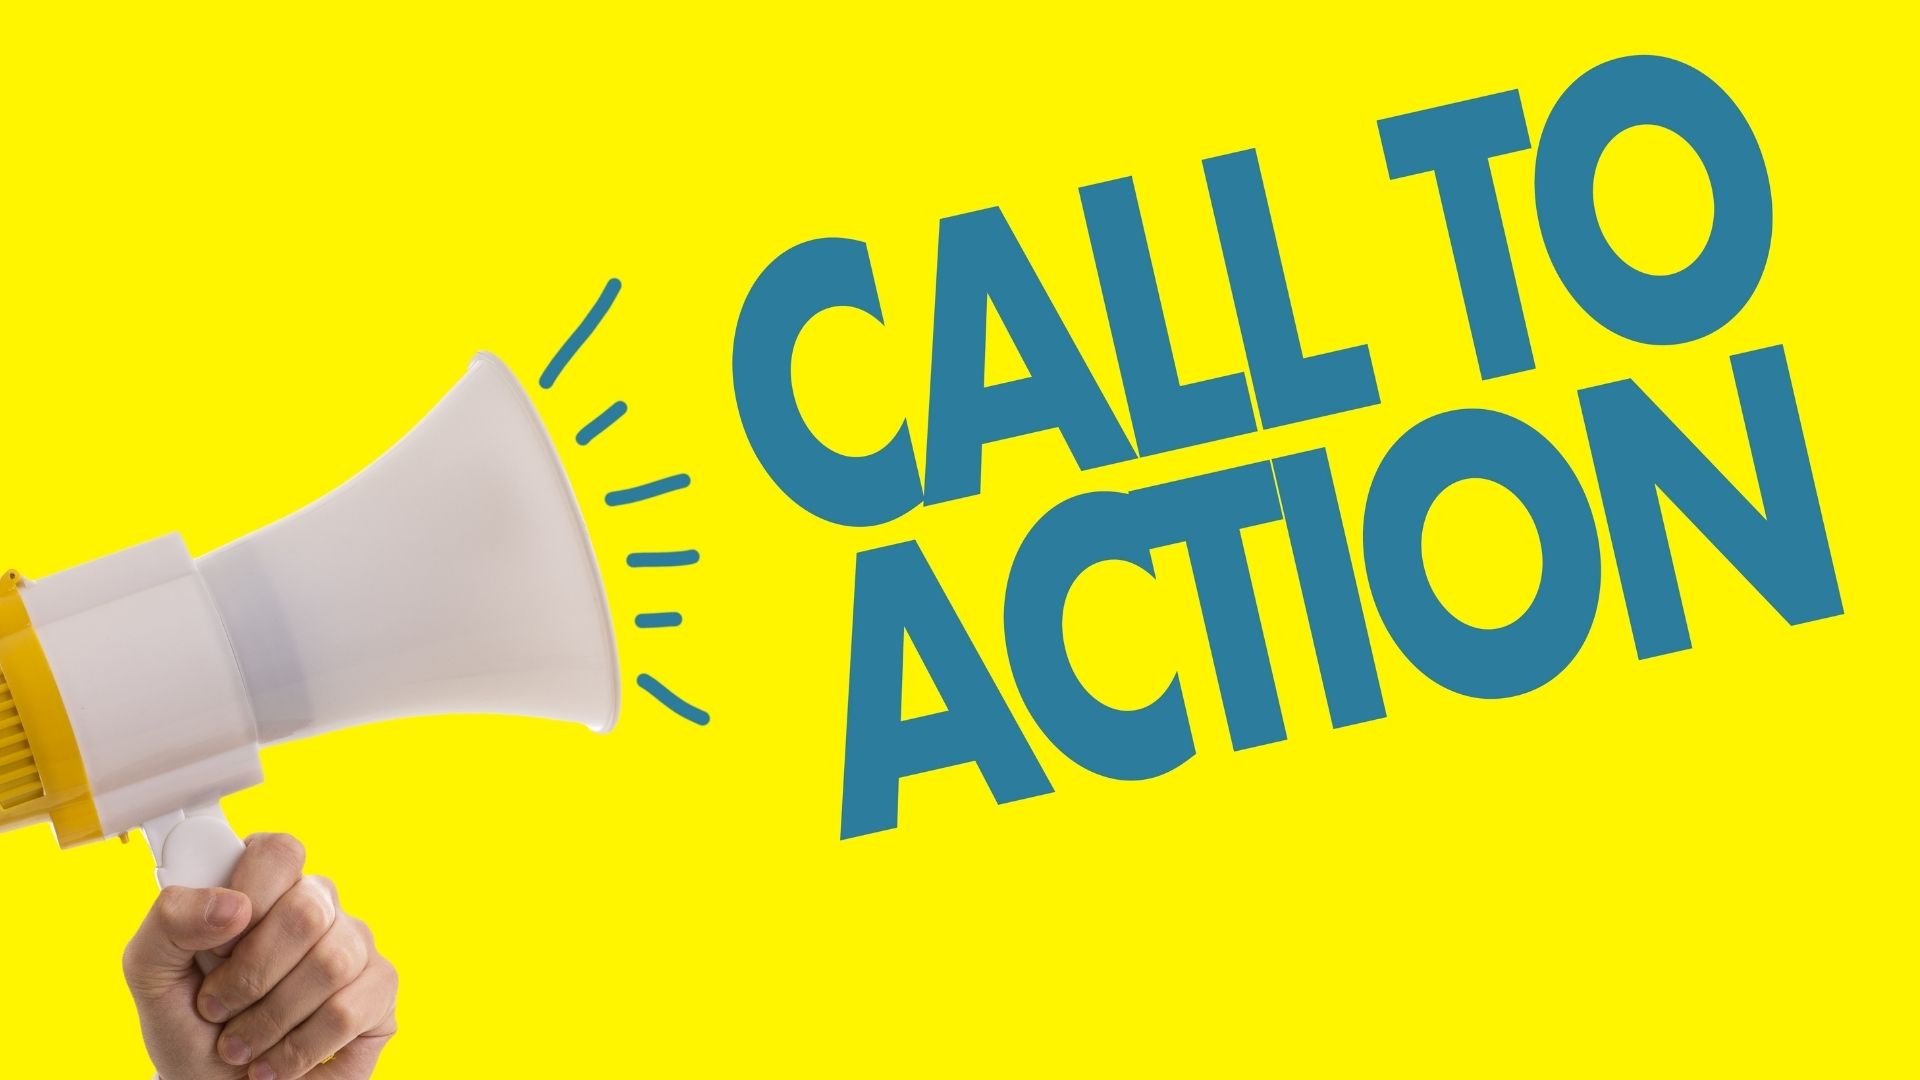 Call to action | Dictionary by Darvideo